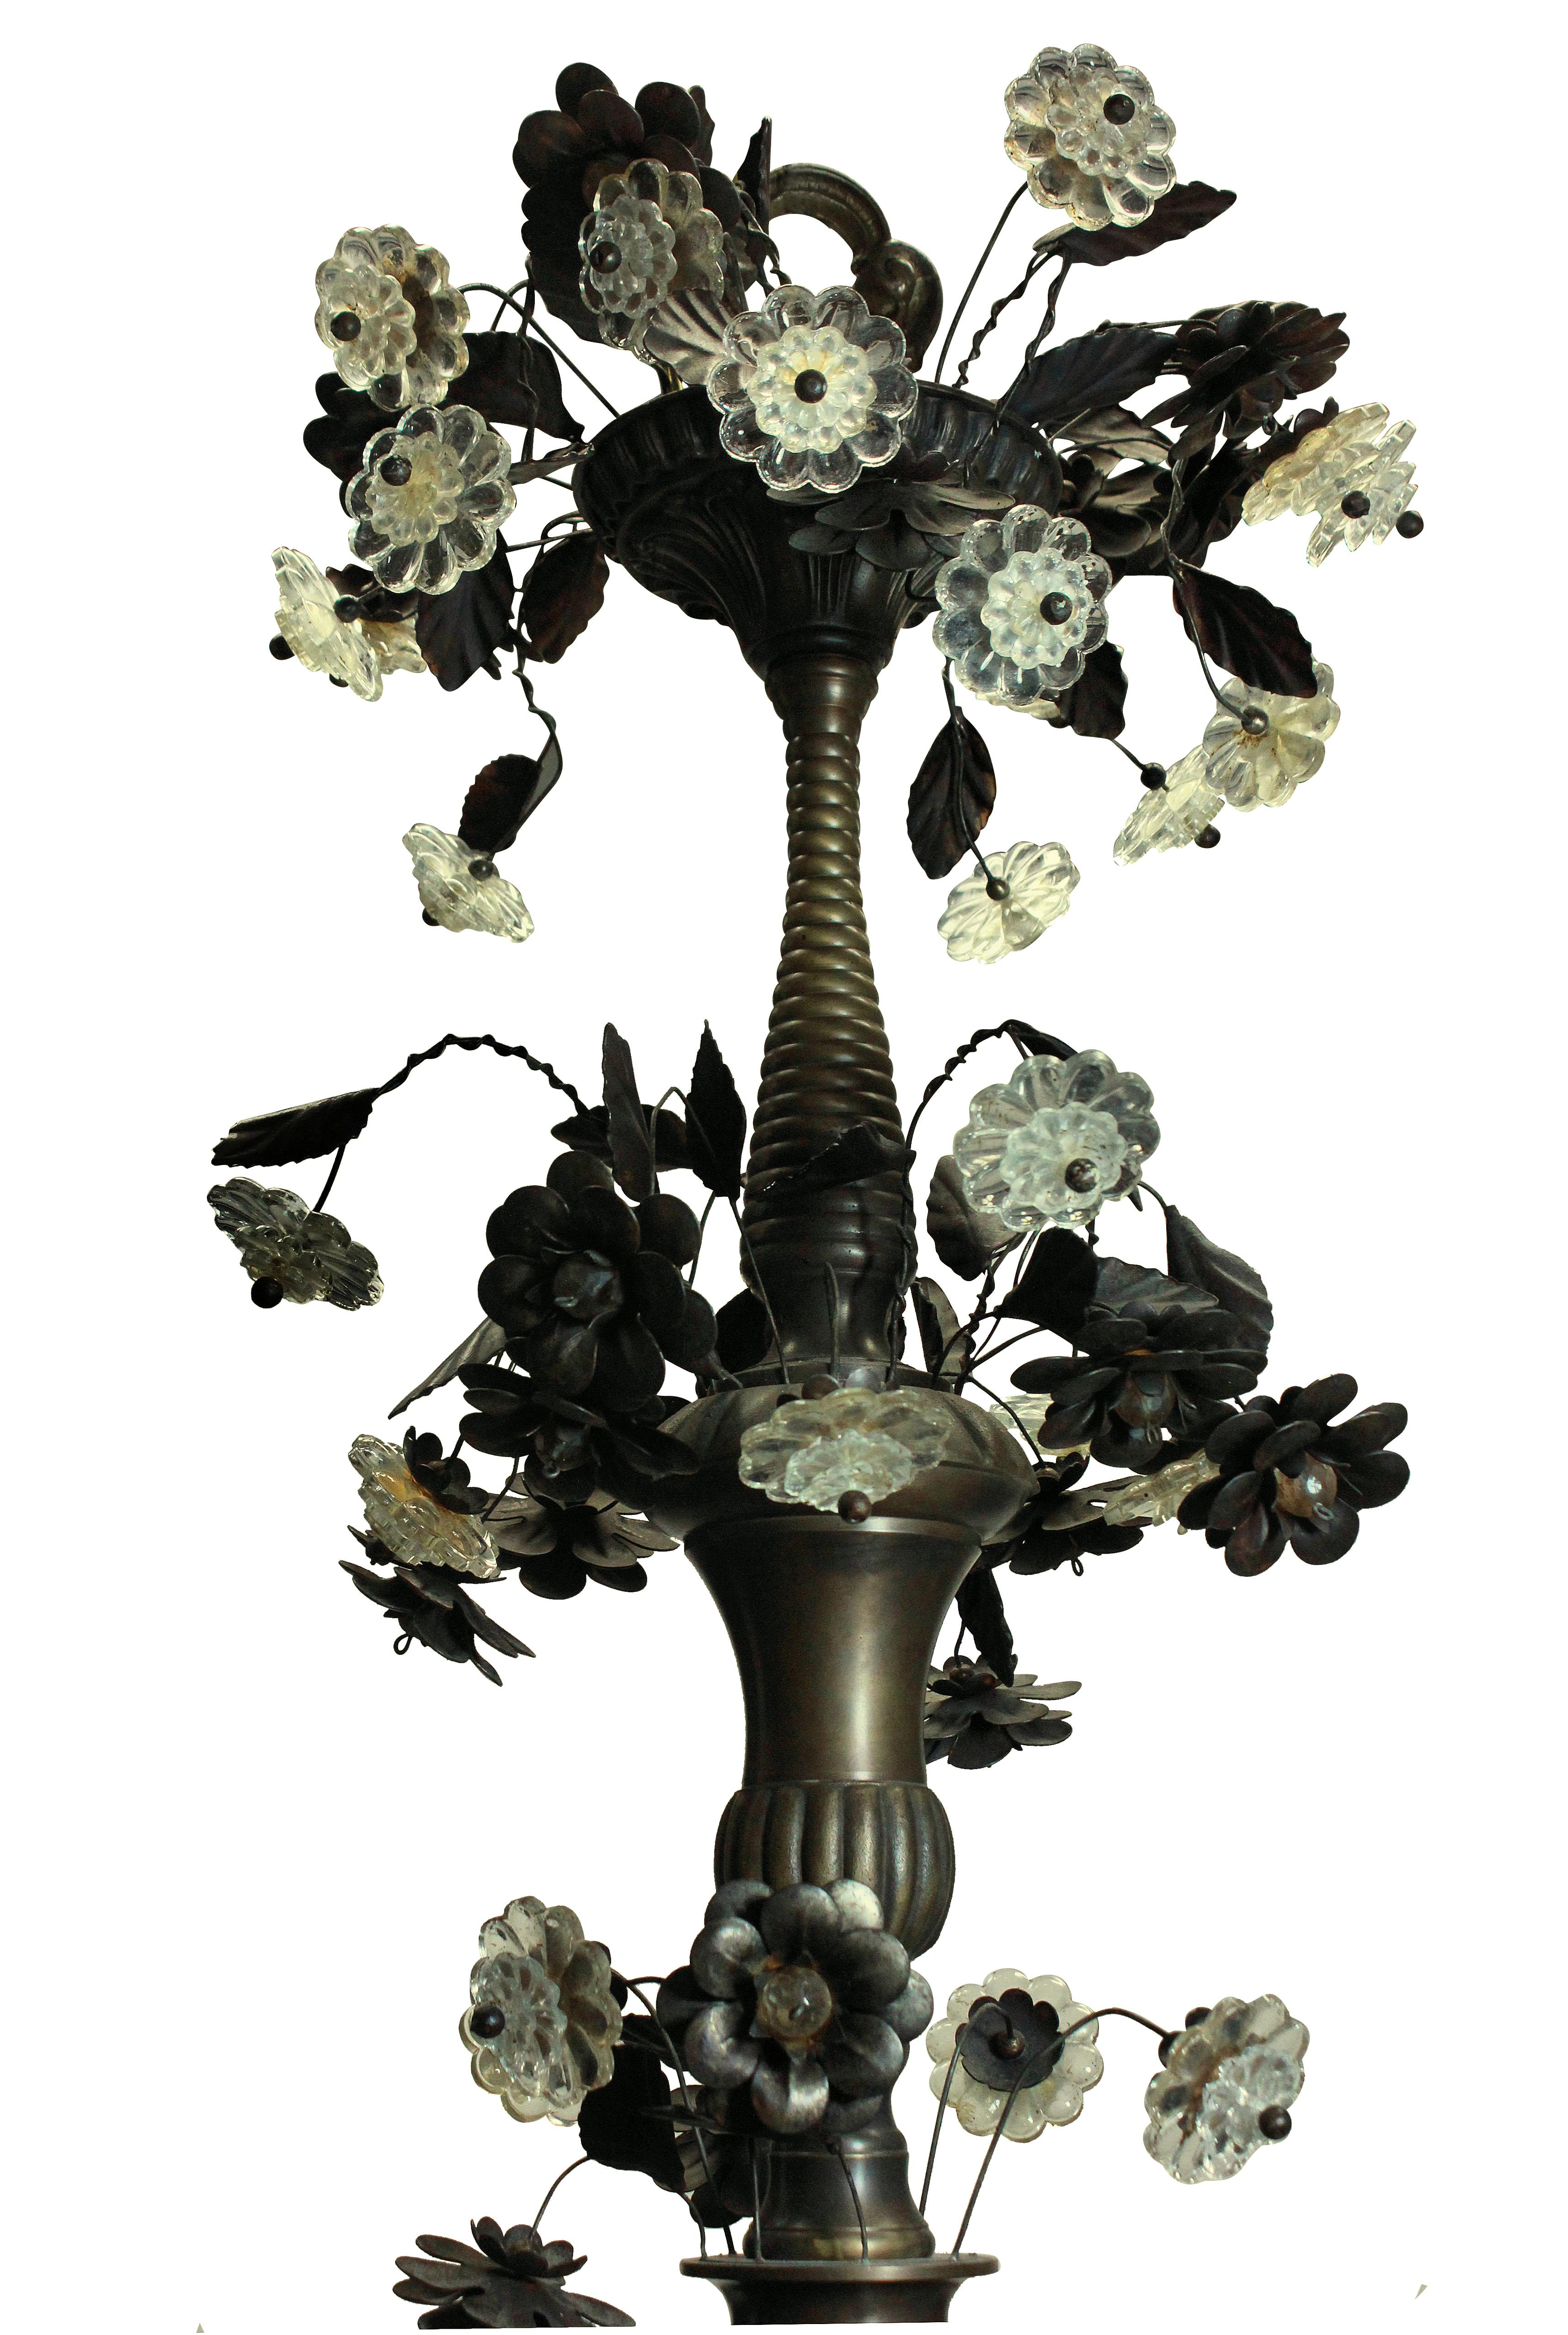 A large English bronzed chandelier of elegant proportions with eight arms, decorated throughout with delicate leaves and cut glass flowers.